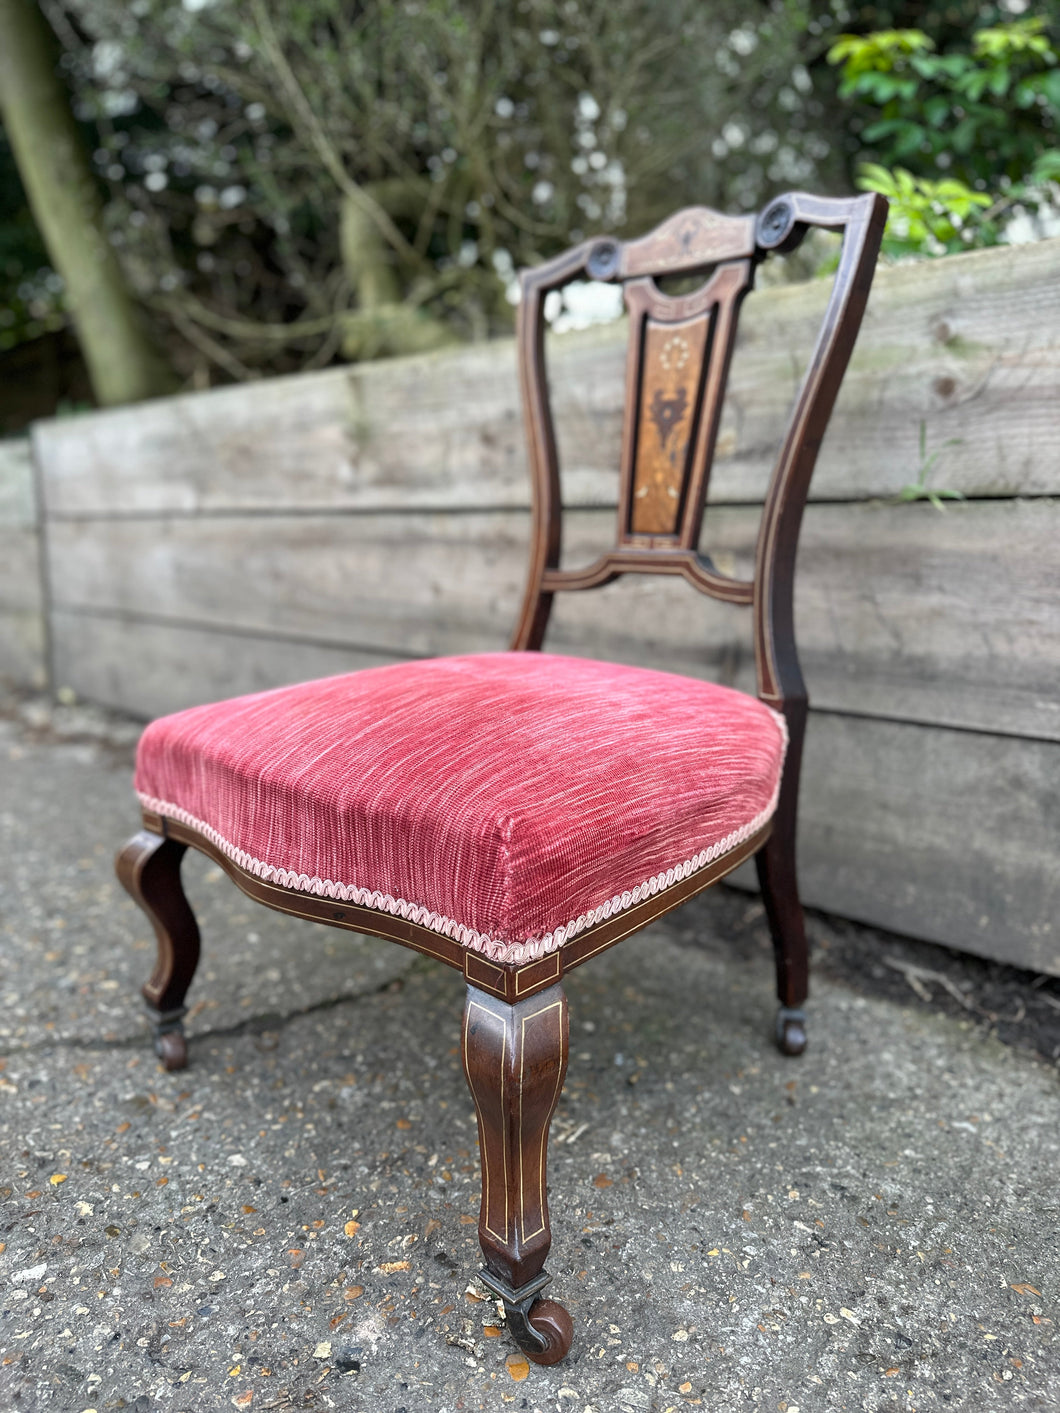 Edwardian Low Occasional Bedroom Chair With Intricate Inlay Detail And Red Upholstered Seat